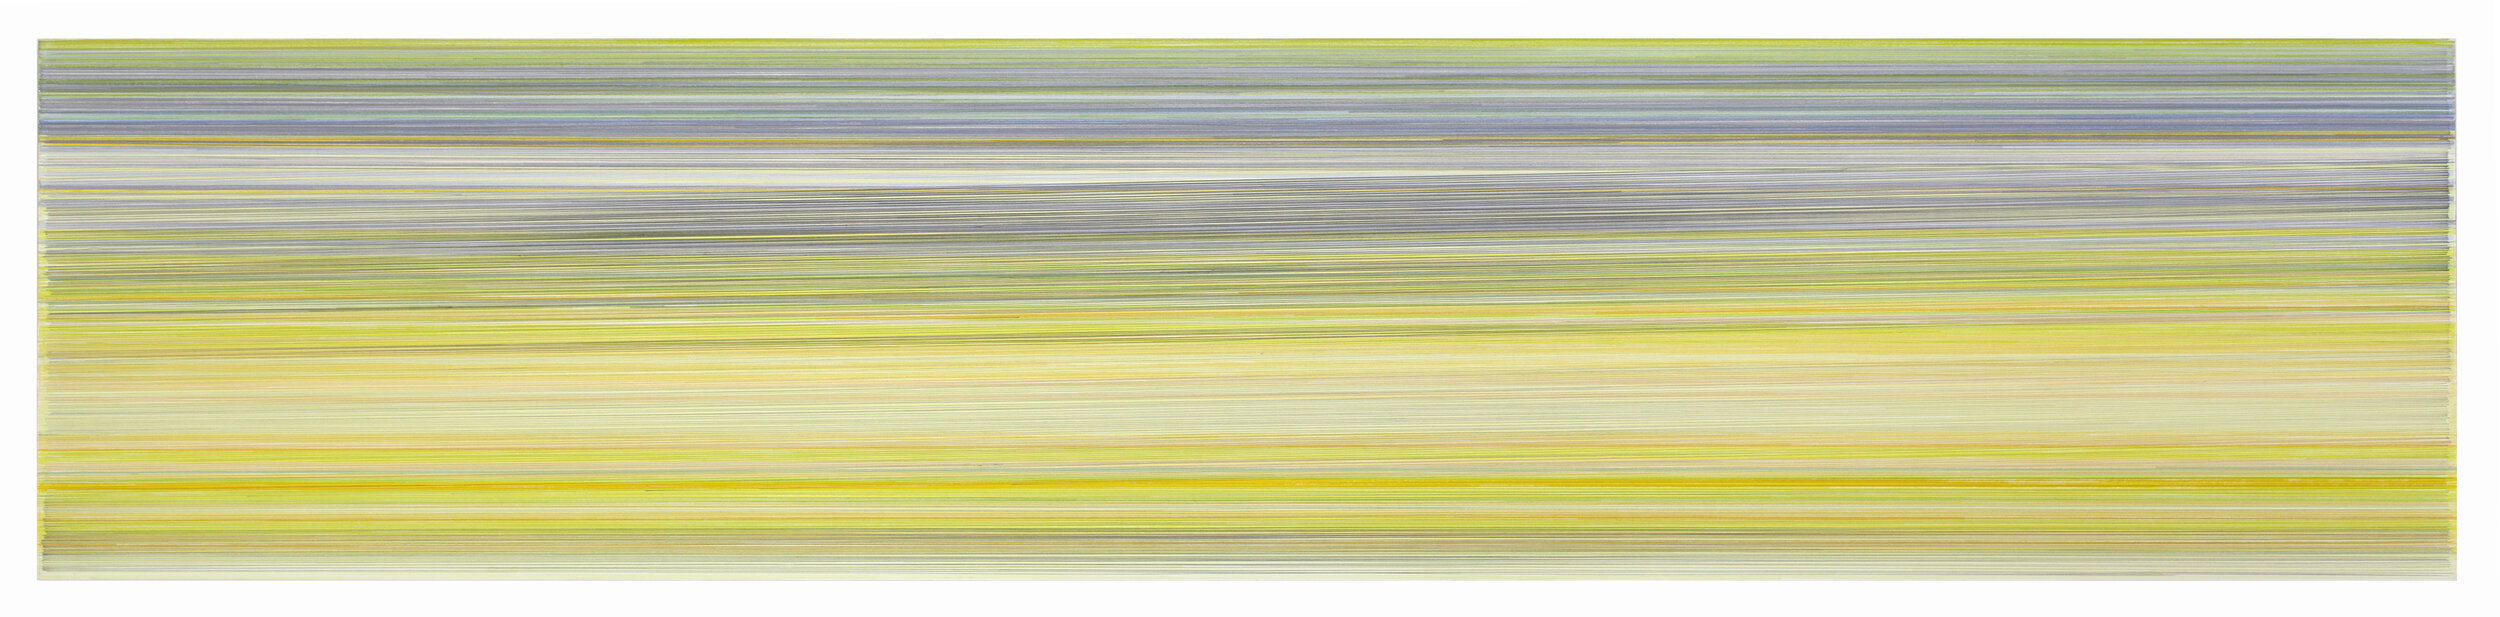    level light   2018 graphite and colored pencil on mat board 20 x 90 inches private collection, Kansas City, Missouri 